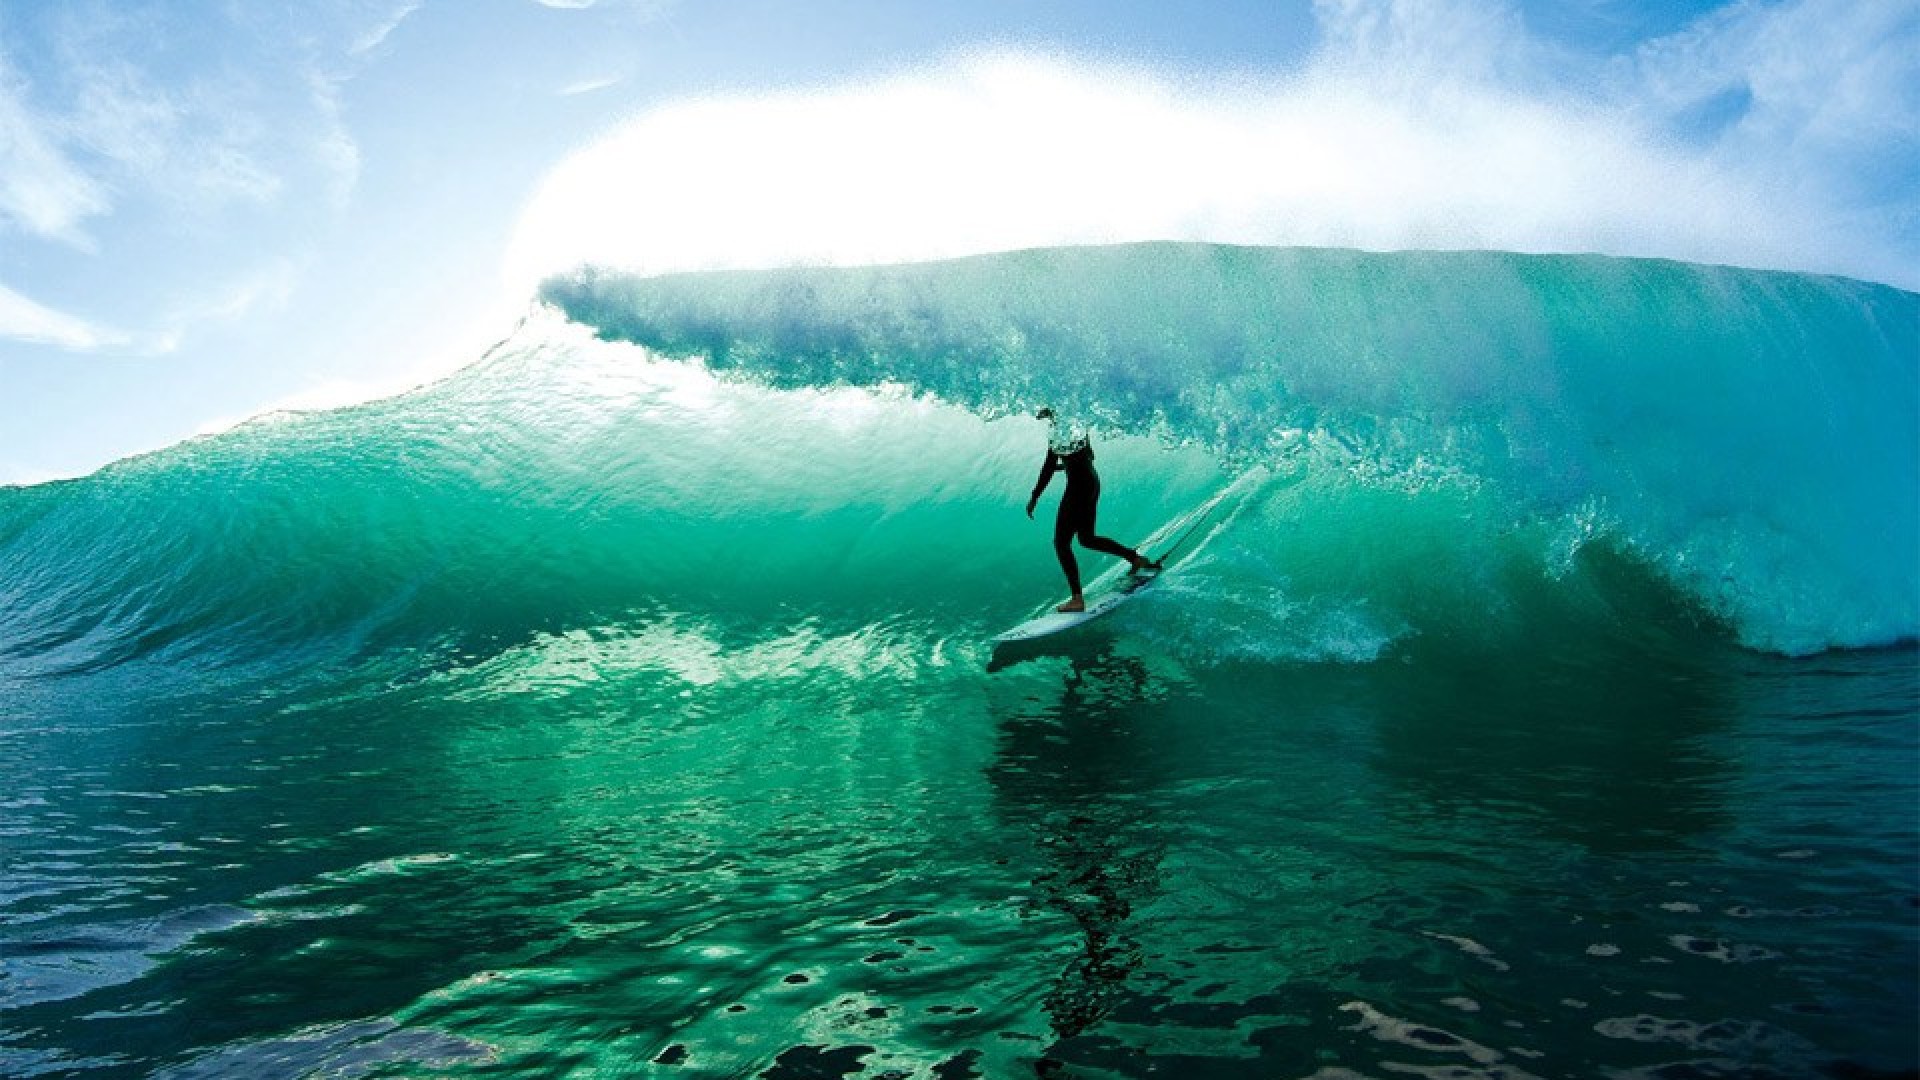 Surfing 1080p Wallpaper High Definition Quality